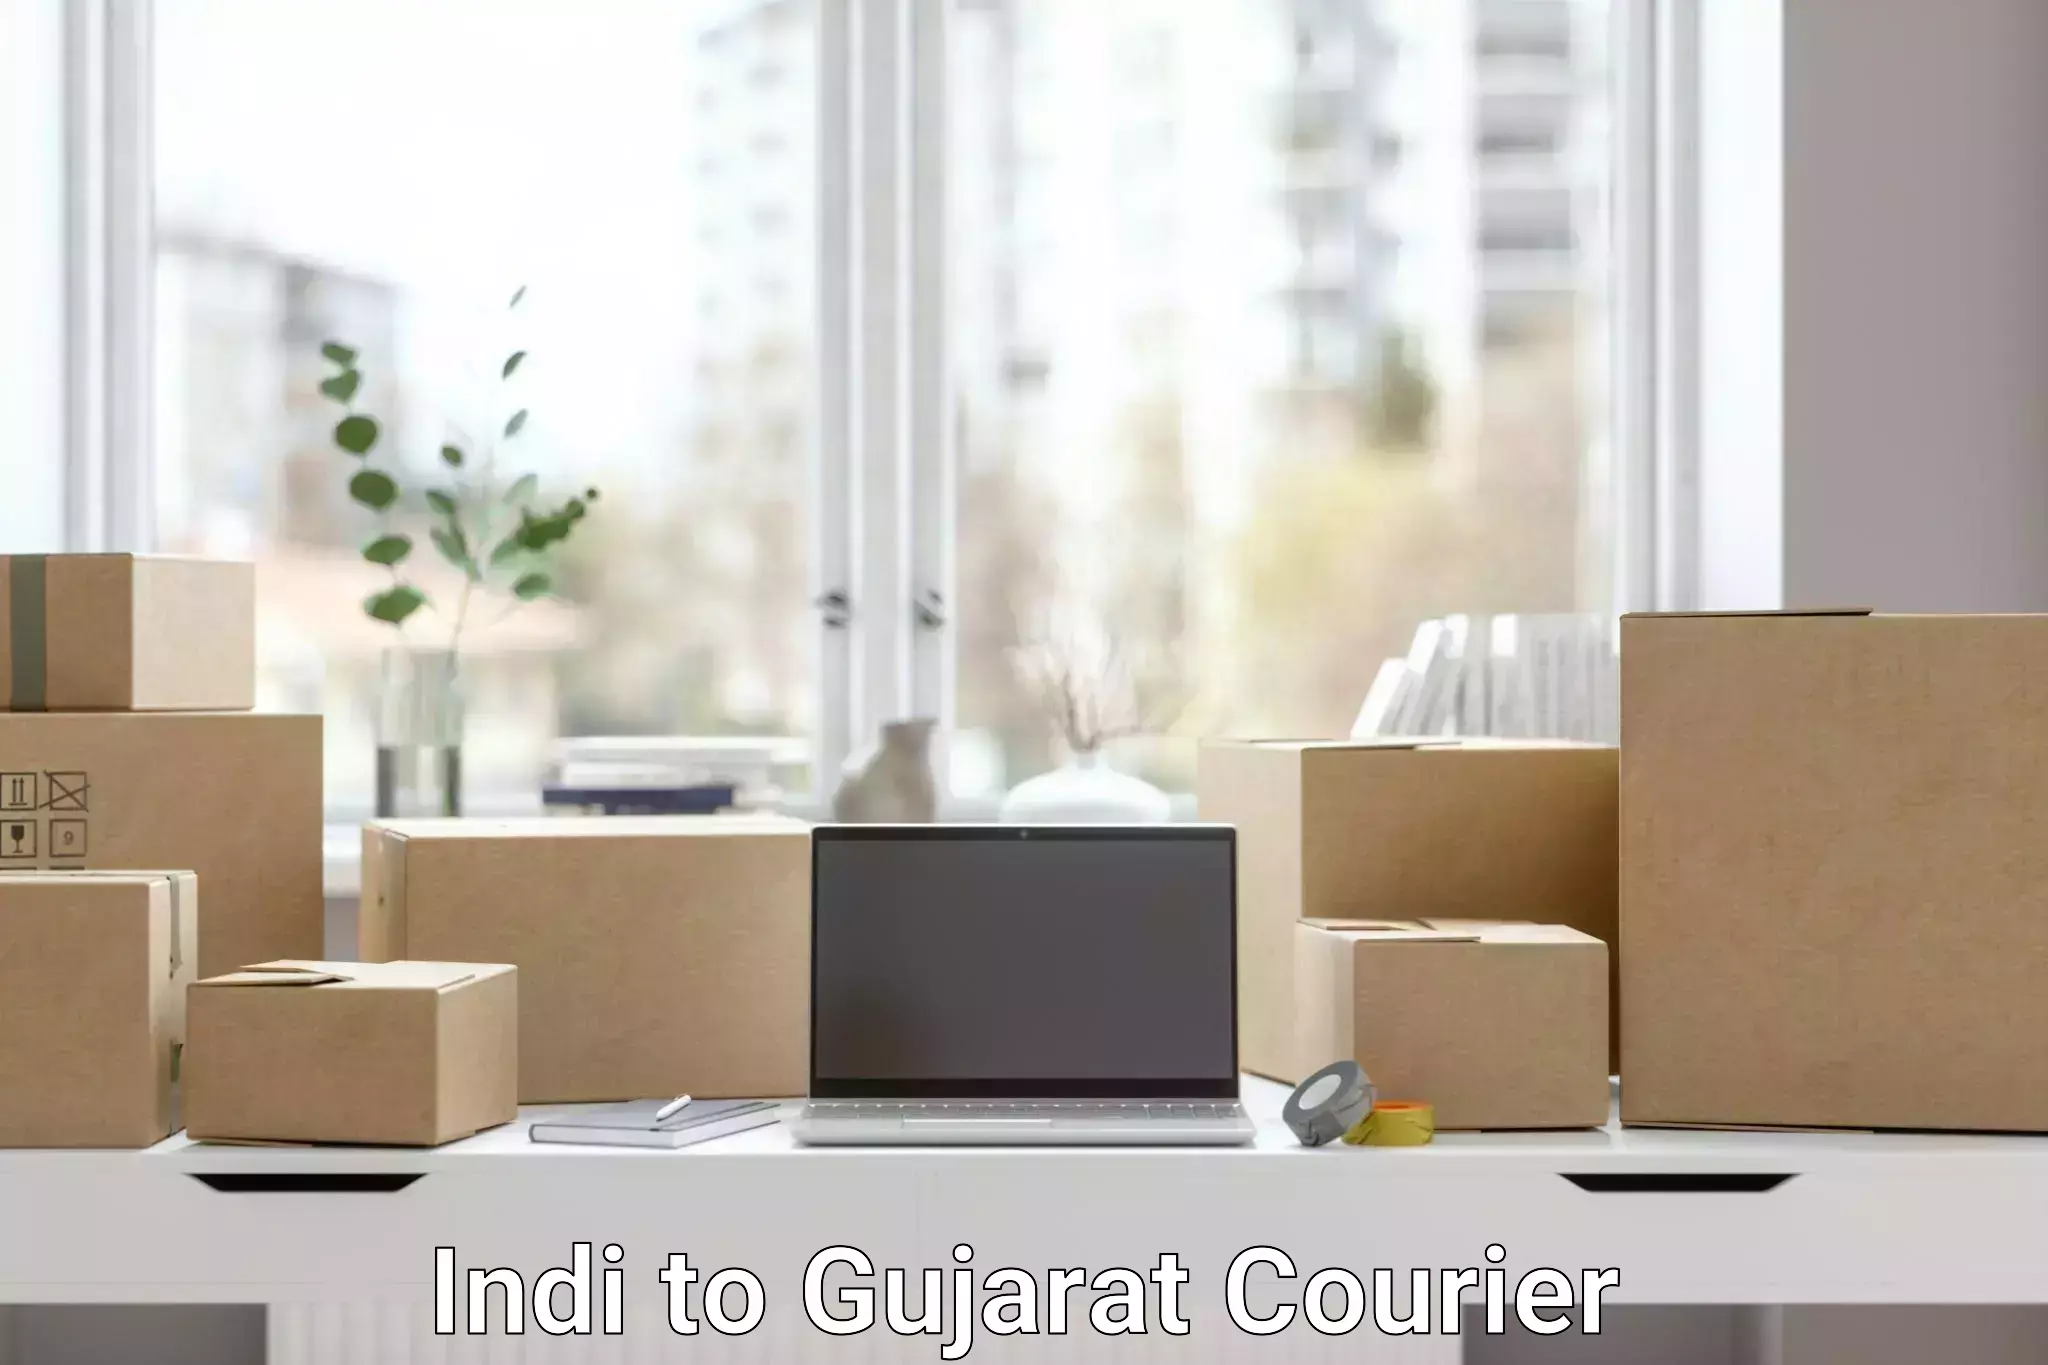 Delivery service partnership in Indi to Gujarat